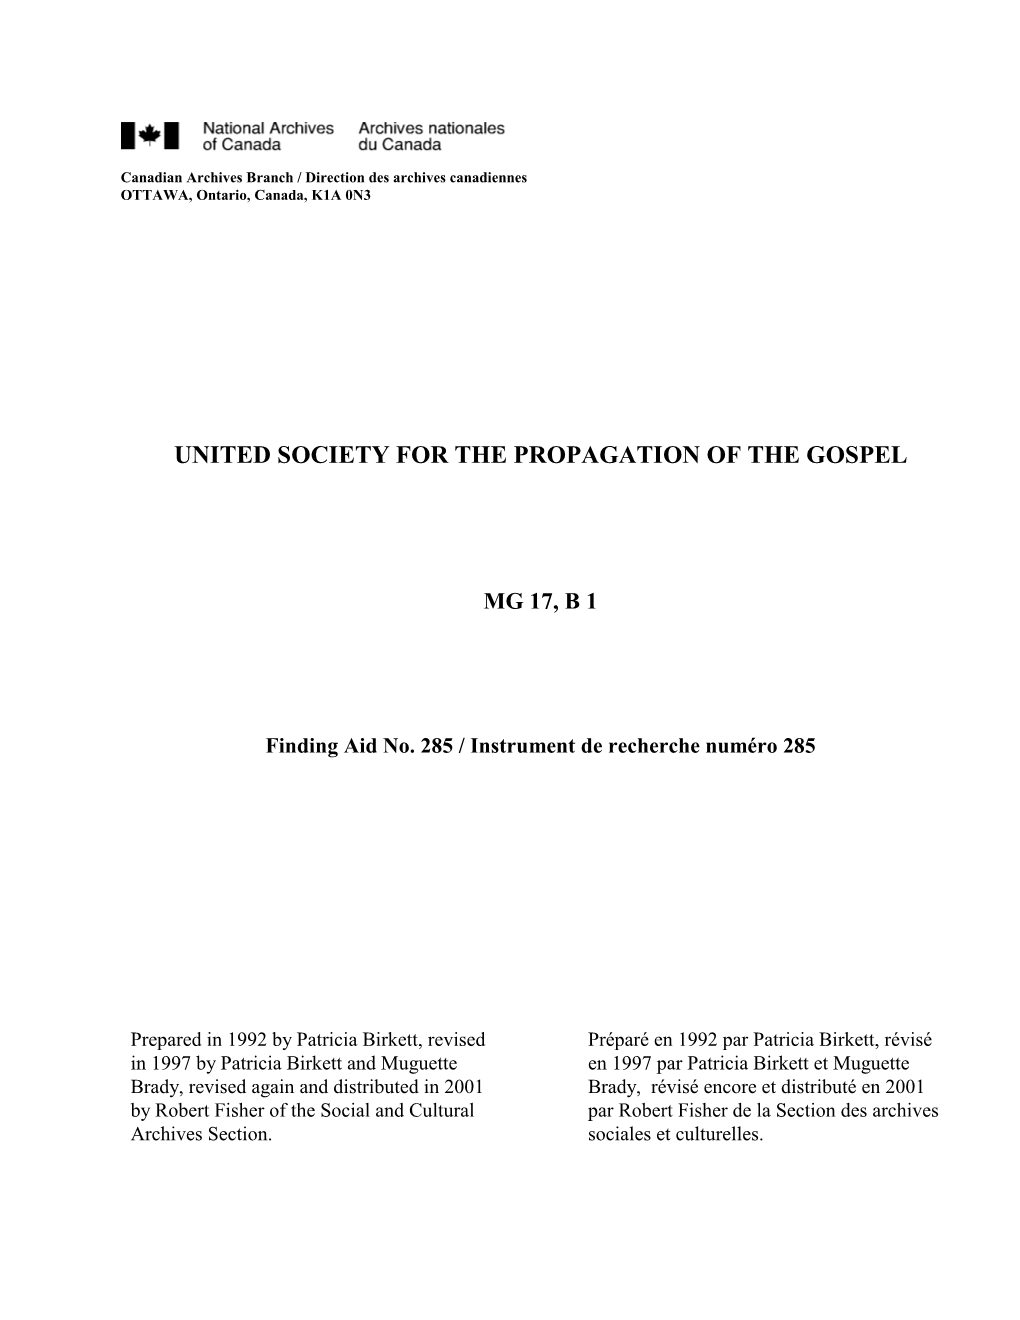 United Society for the Propagation of the Gospel